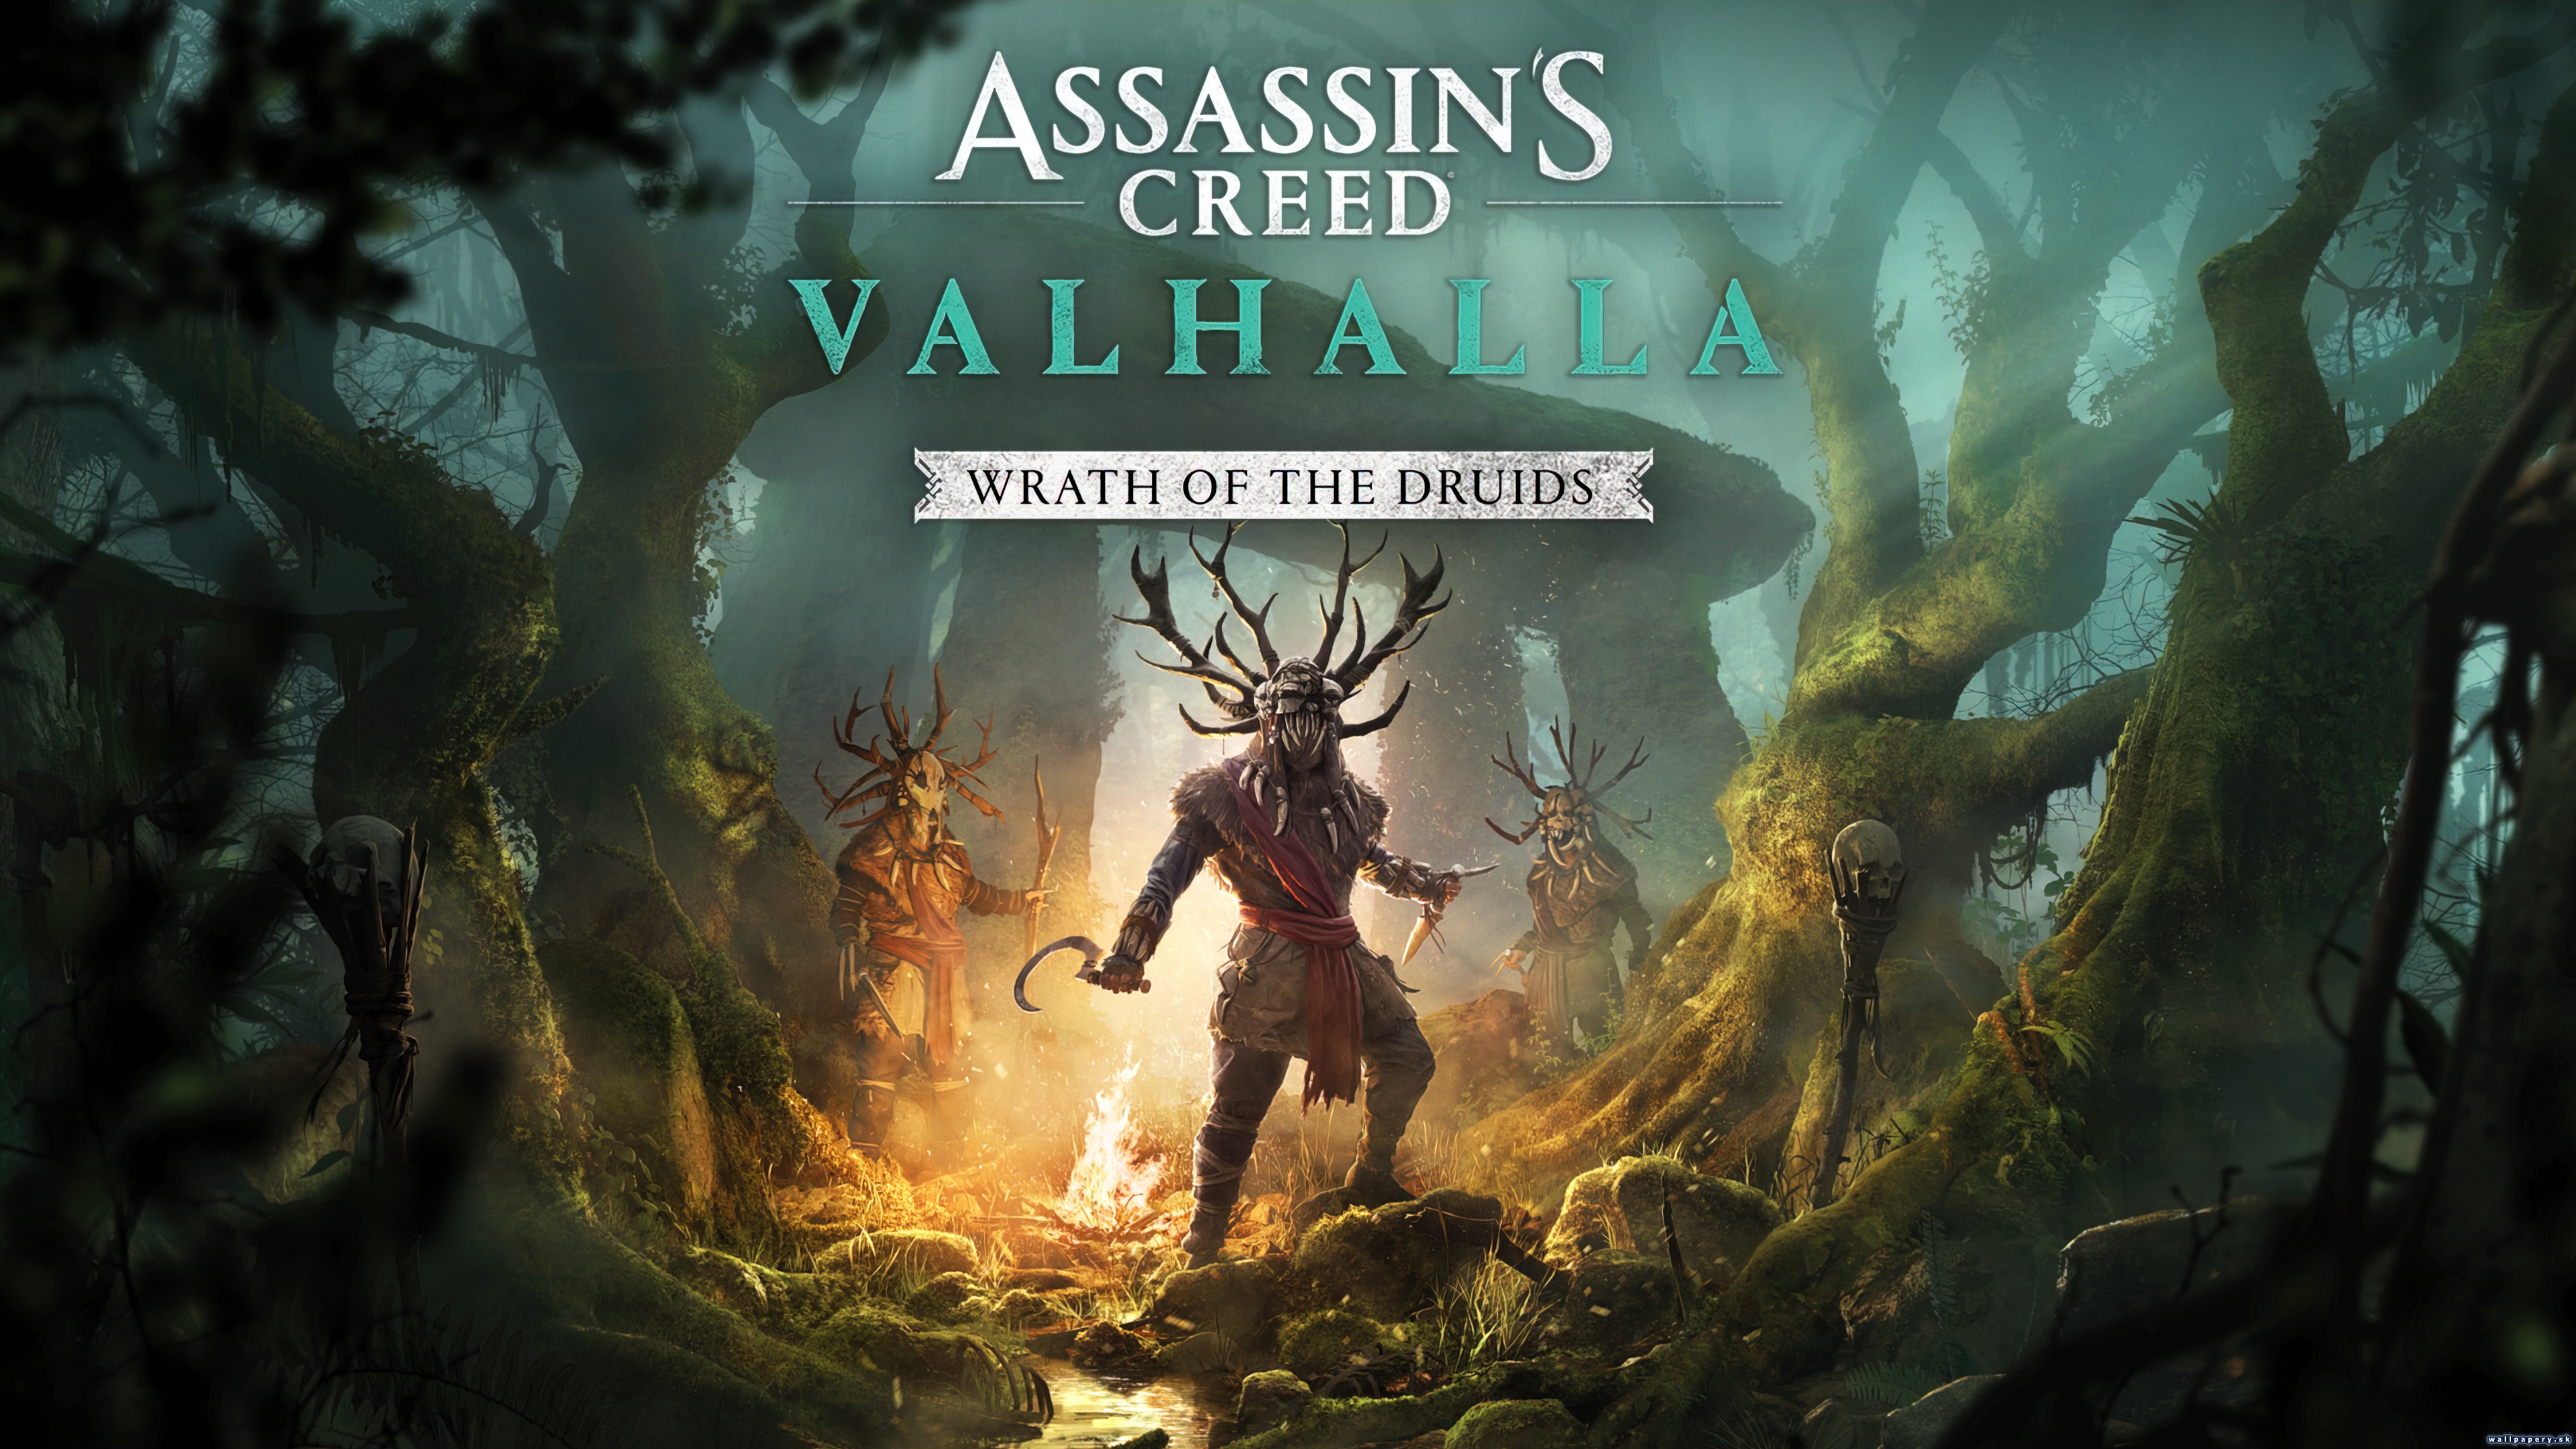 Assassin's Creed: Valhalla - Wrath of the Druids - wallpaper 1